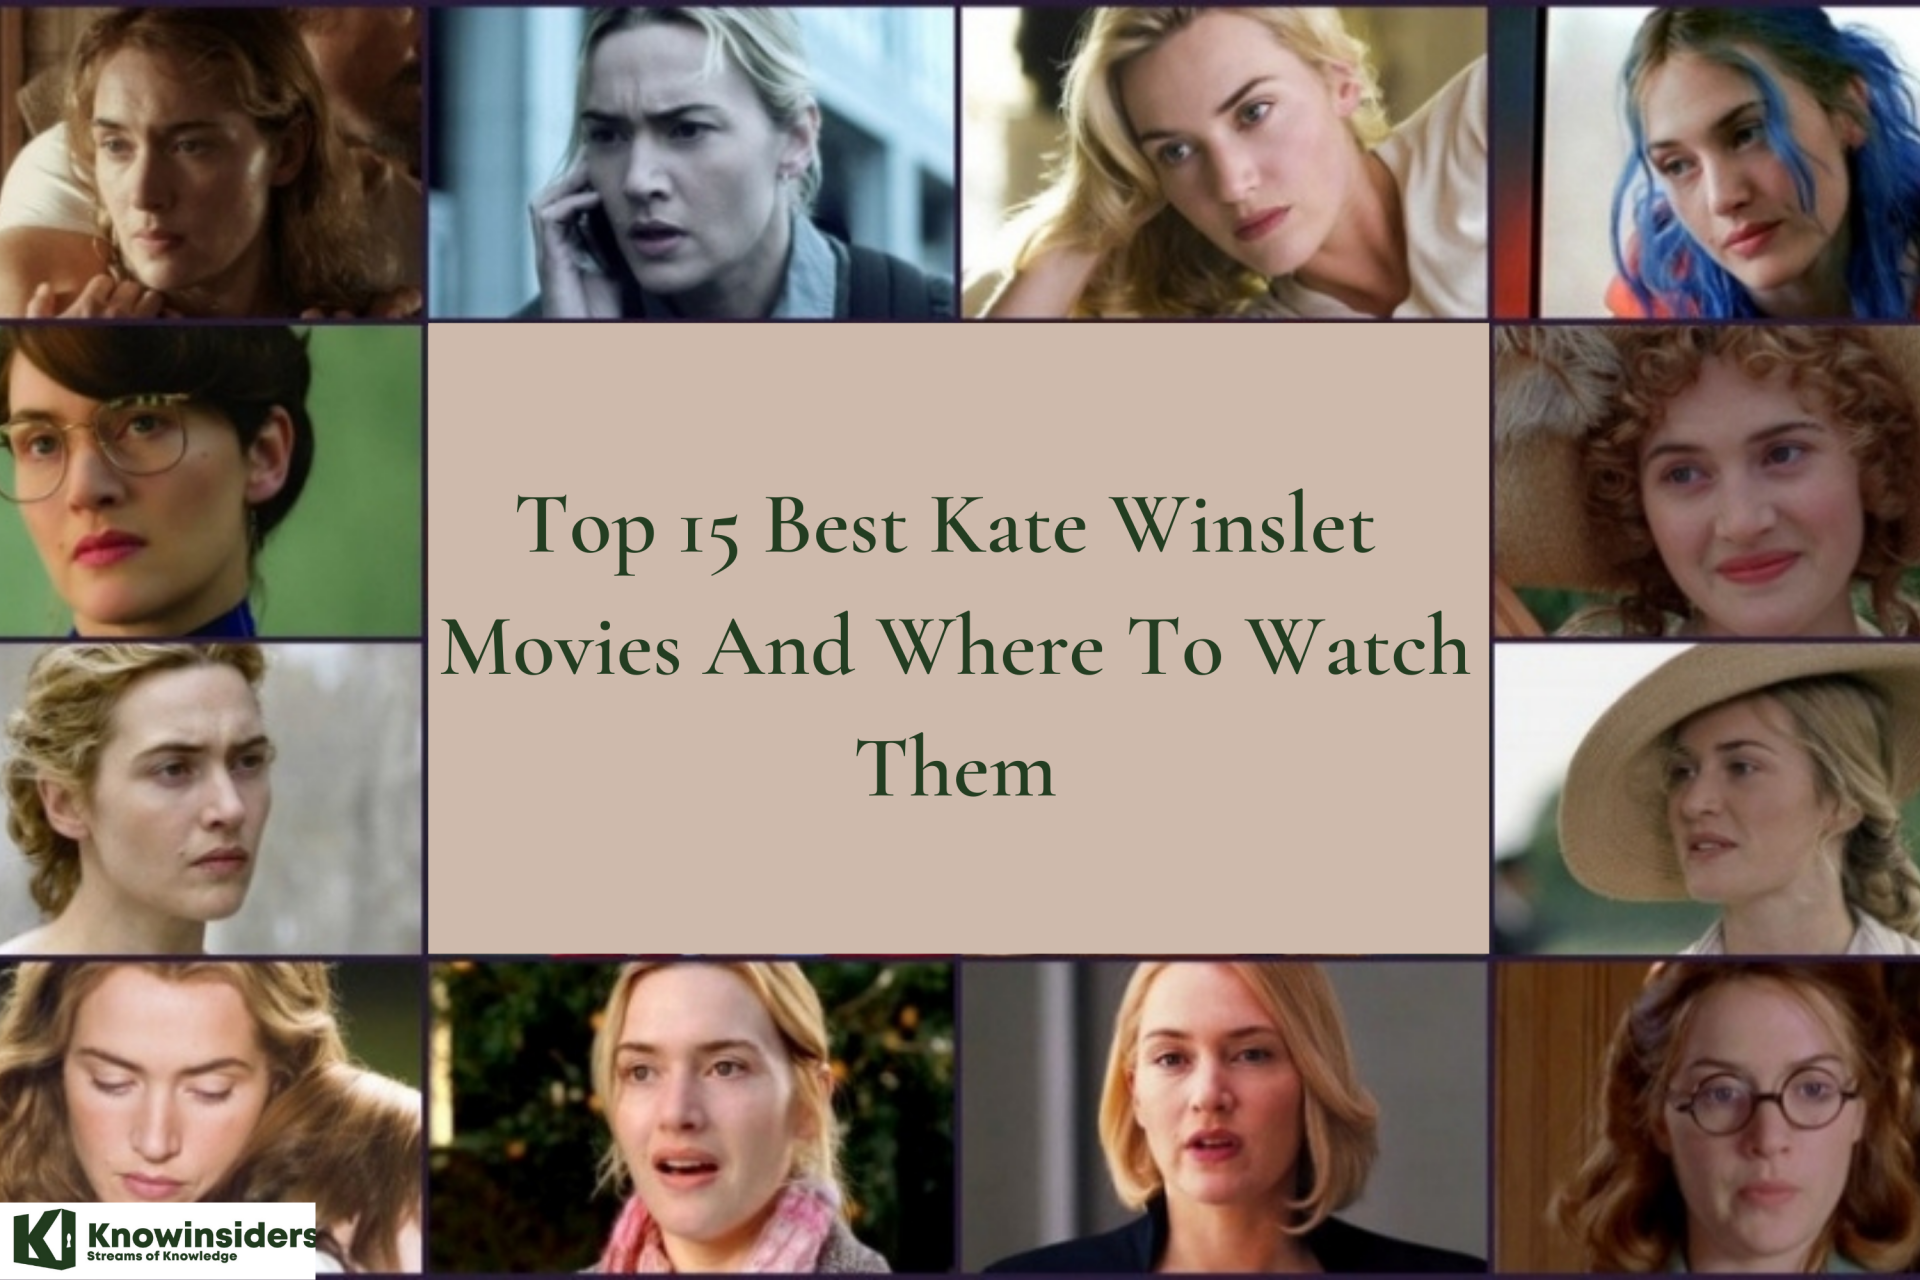 Top 15 Best Kate Winslet Movies And Where To Watch Them KnowInsiders